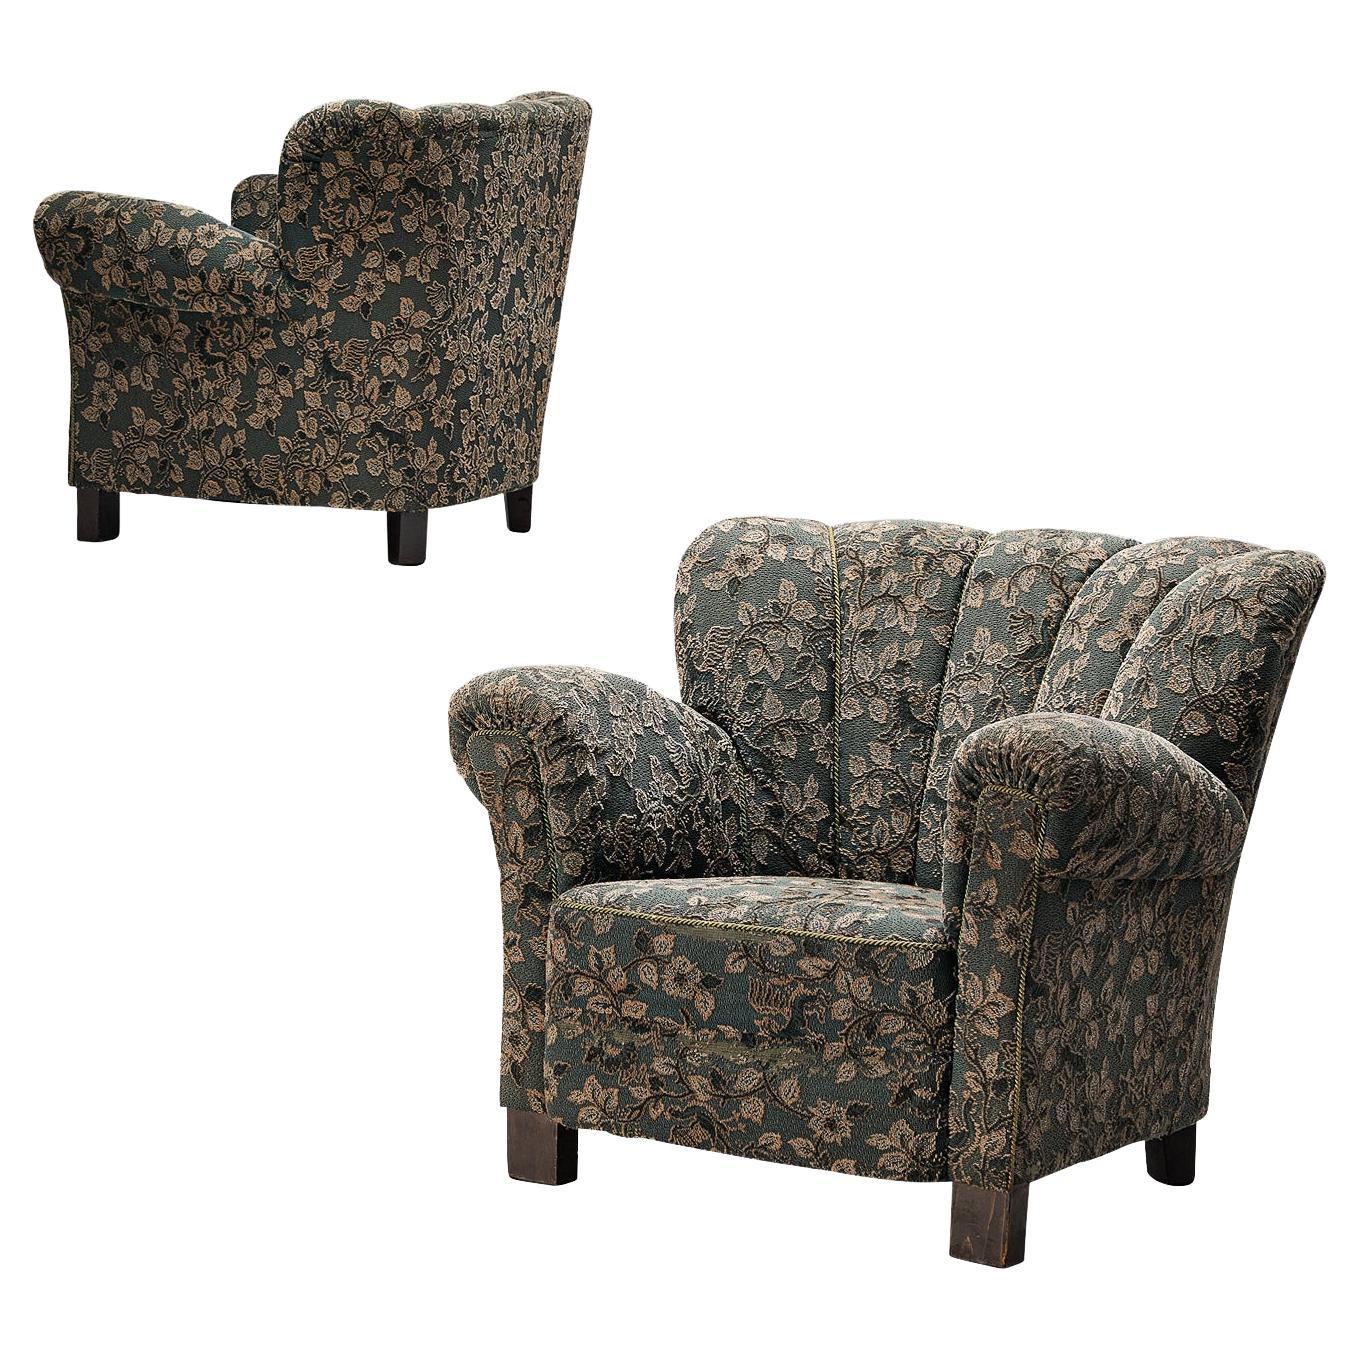 Delicate Pair of Lounge Chairs in Green and Beige Floral Upholstery 